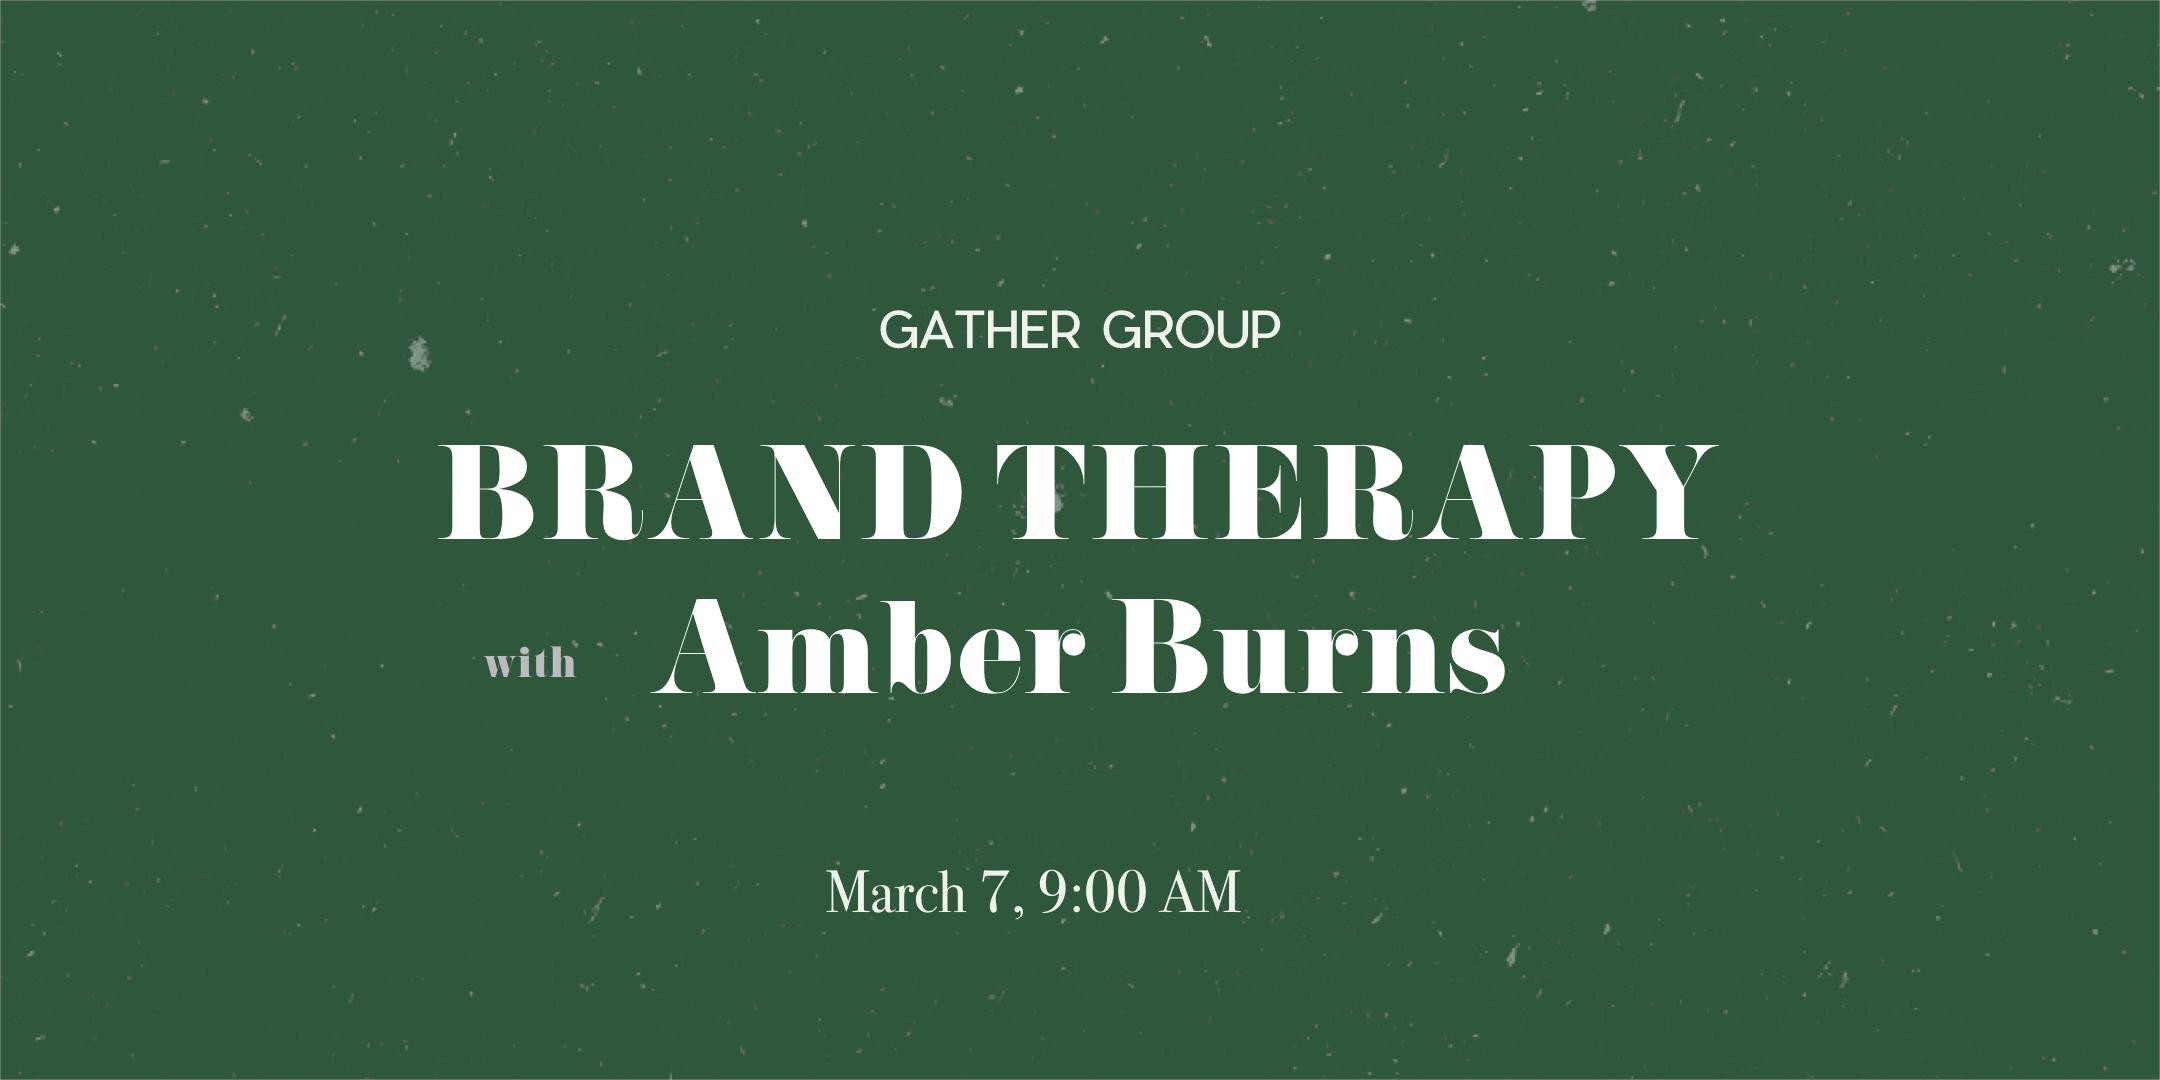 Brand Therapy with Amber Burns